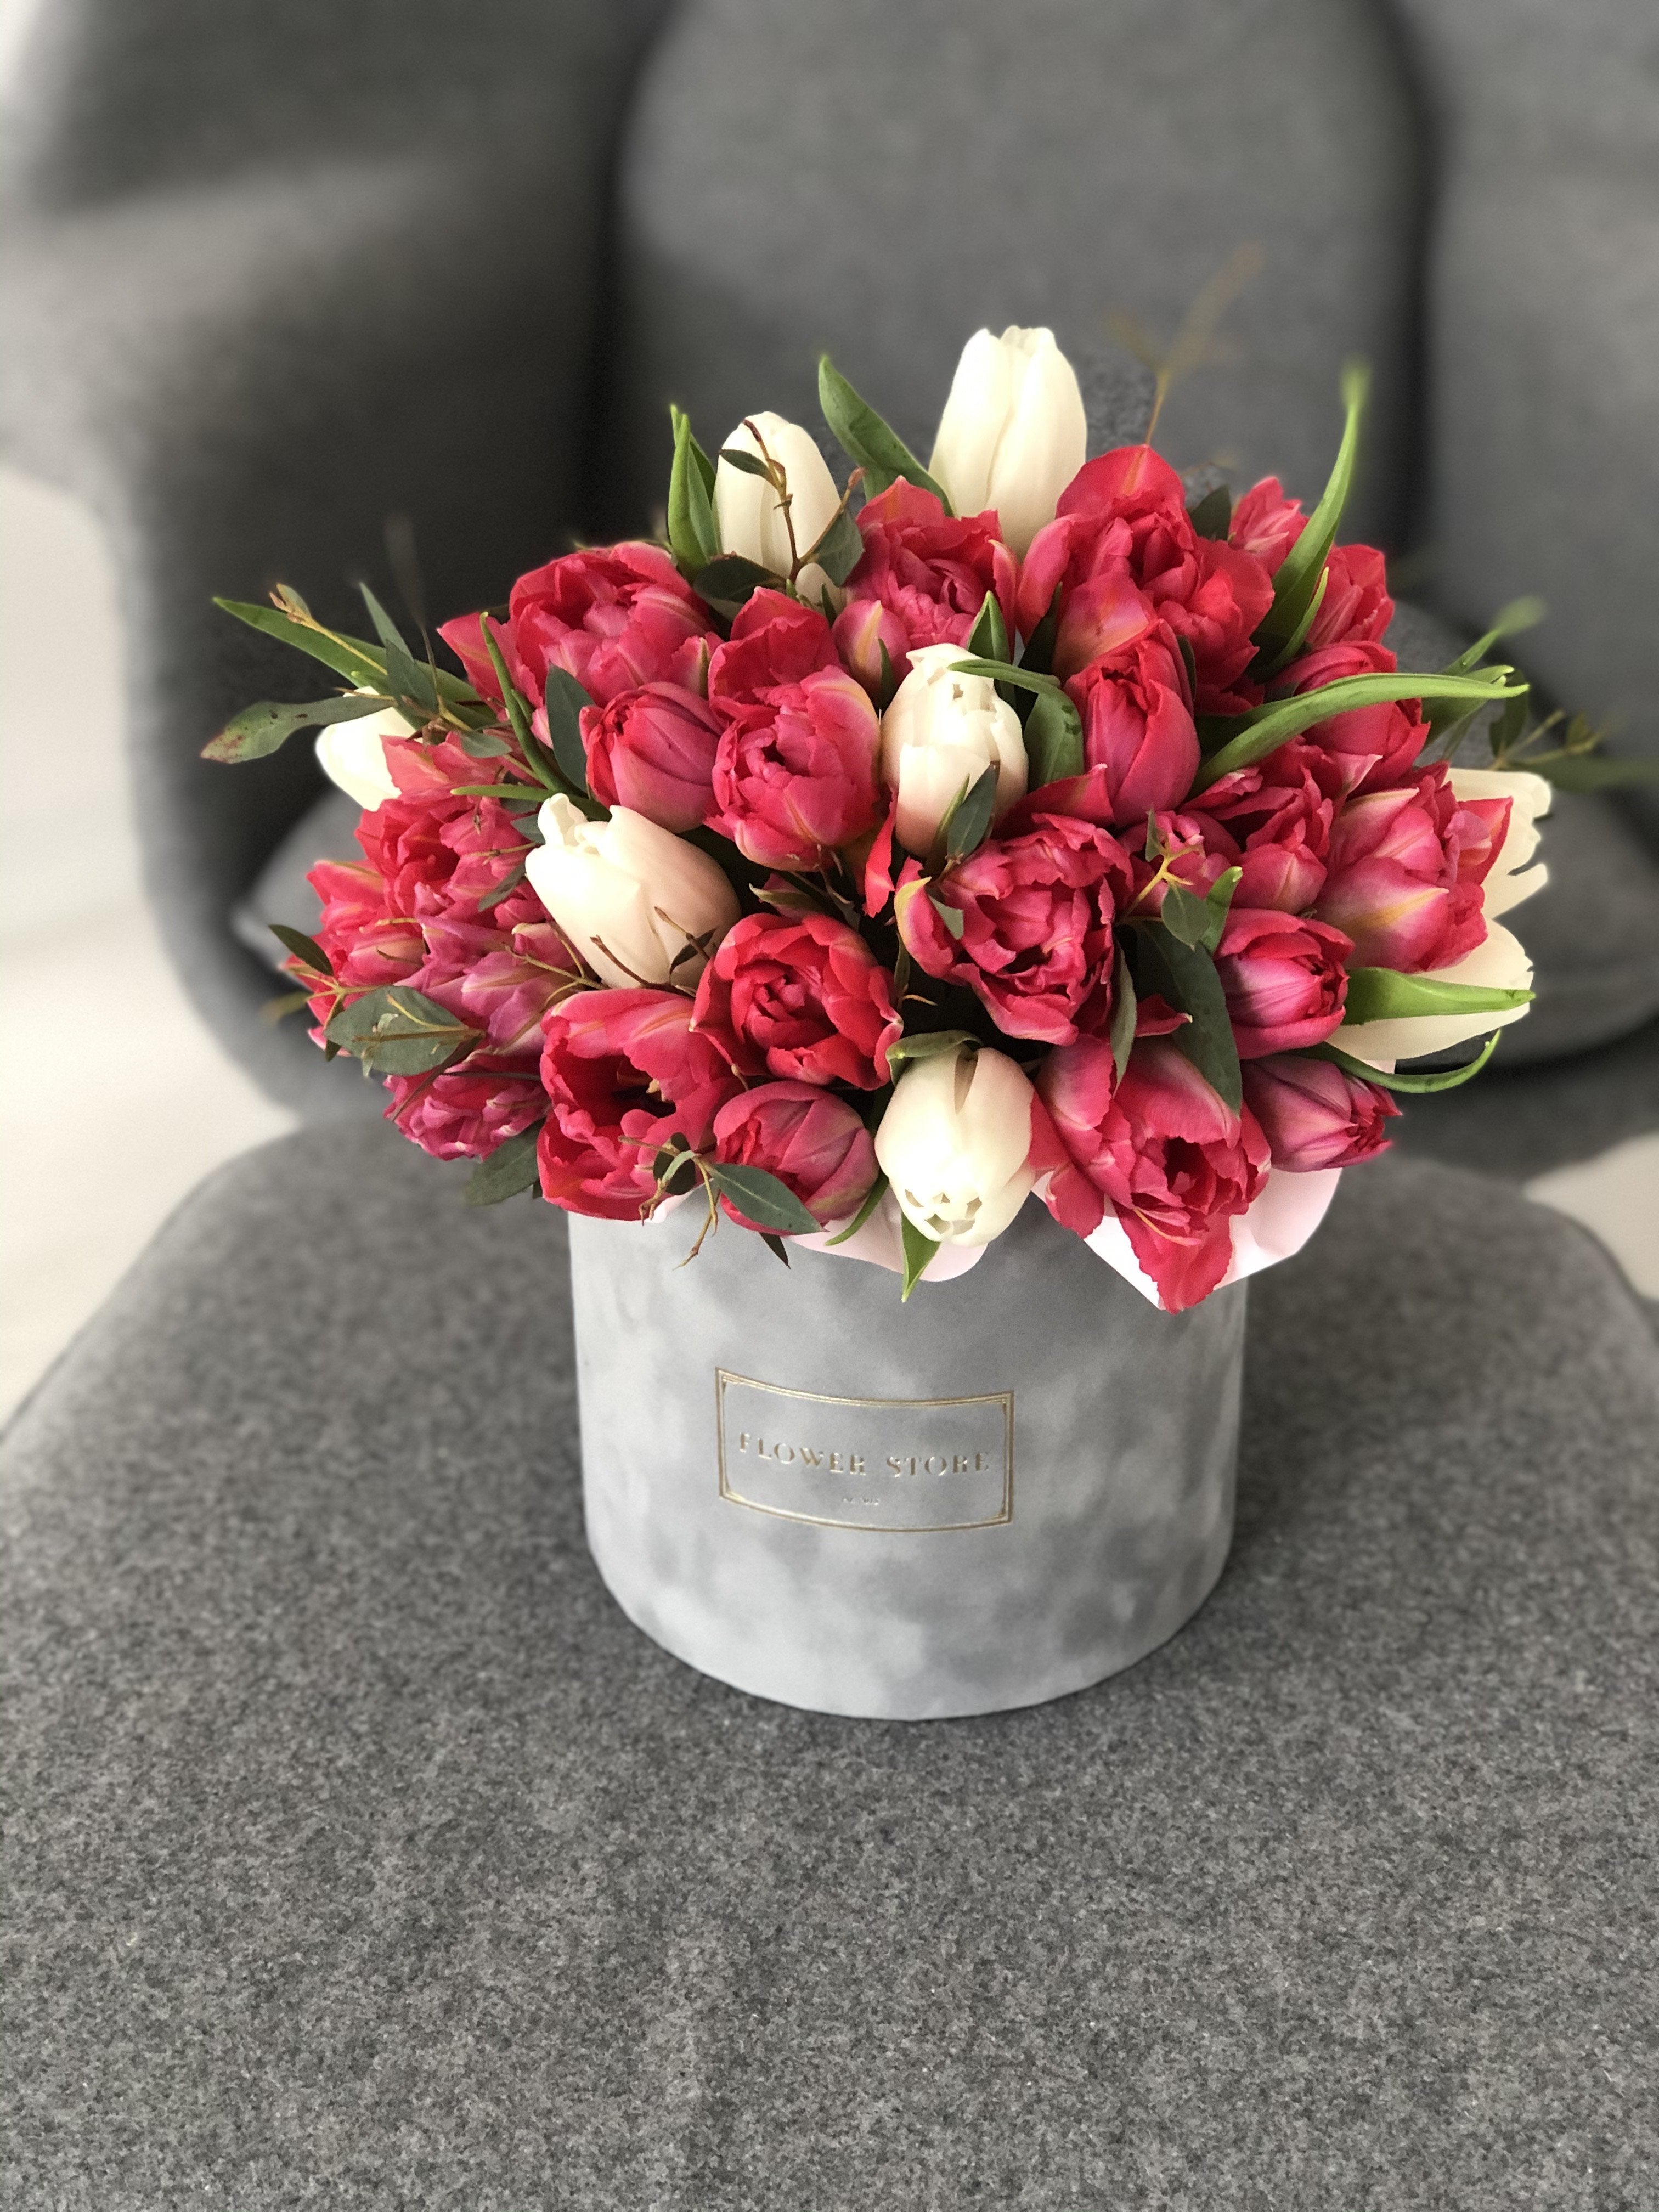 Gray flocked flowerbox with tulips